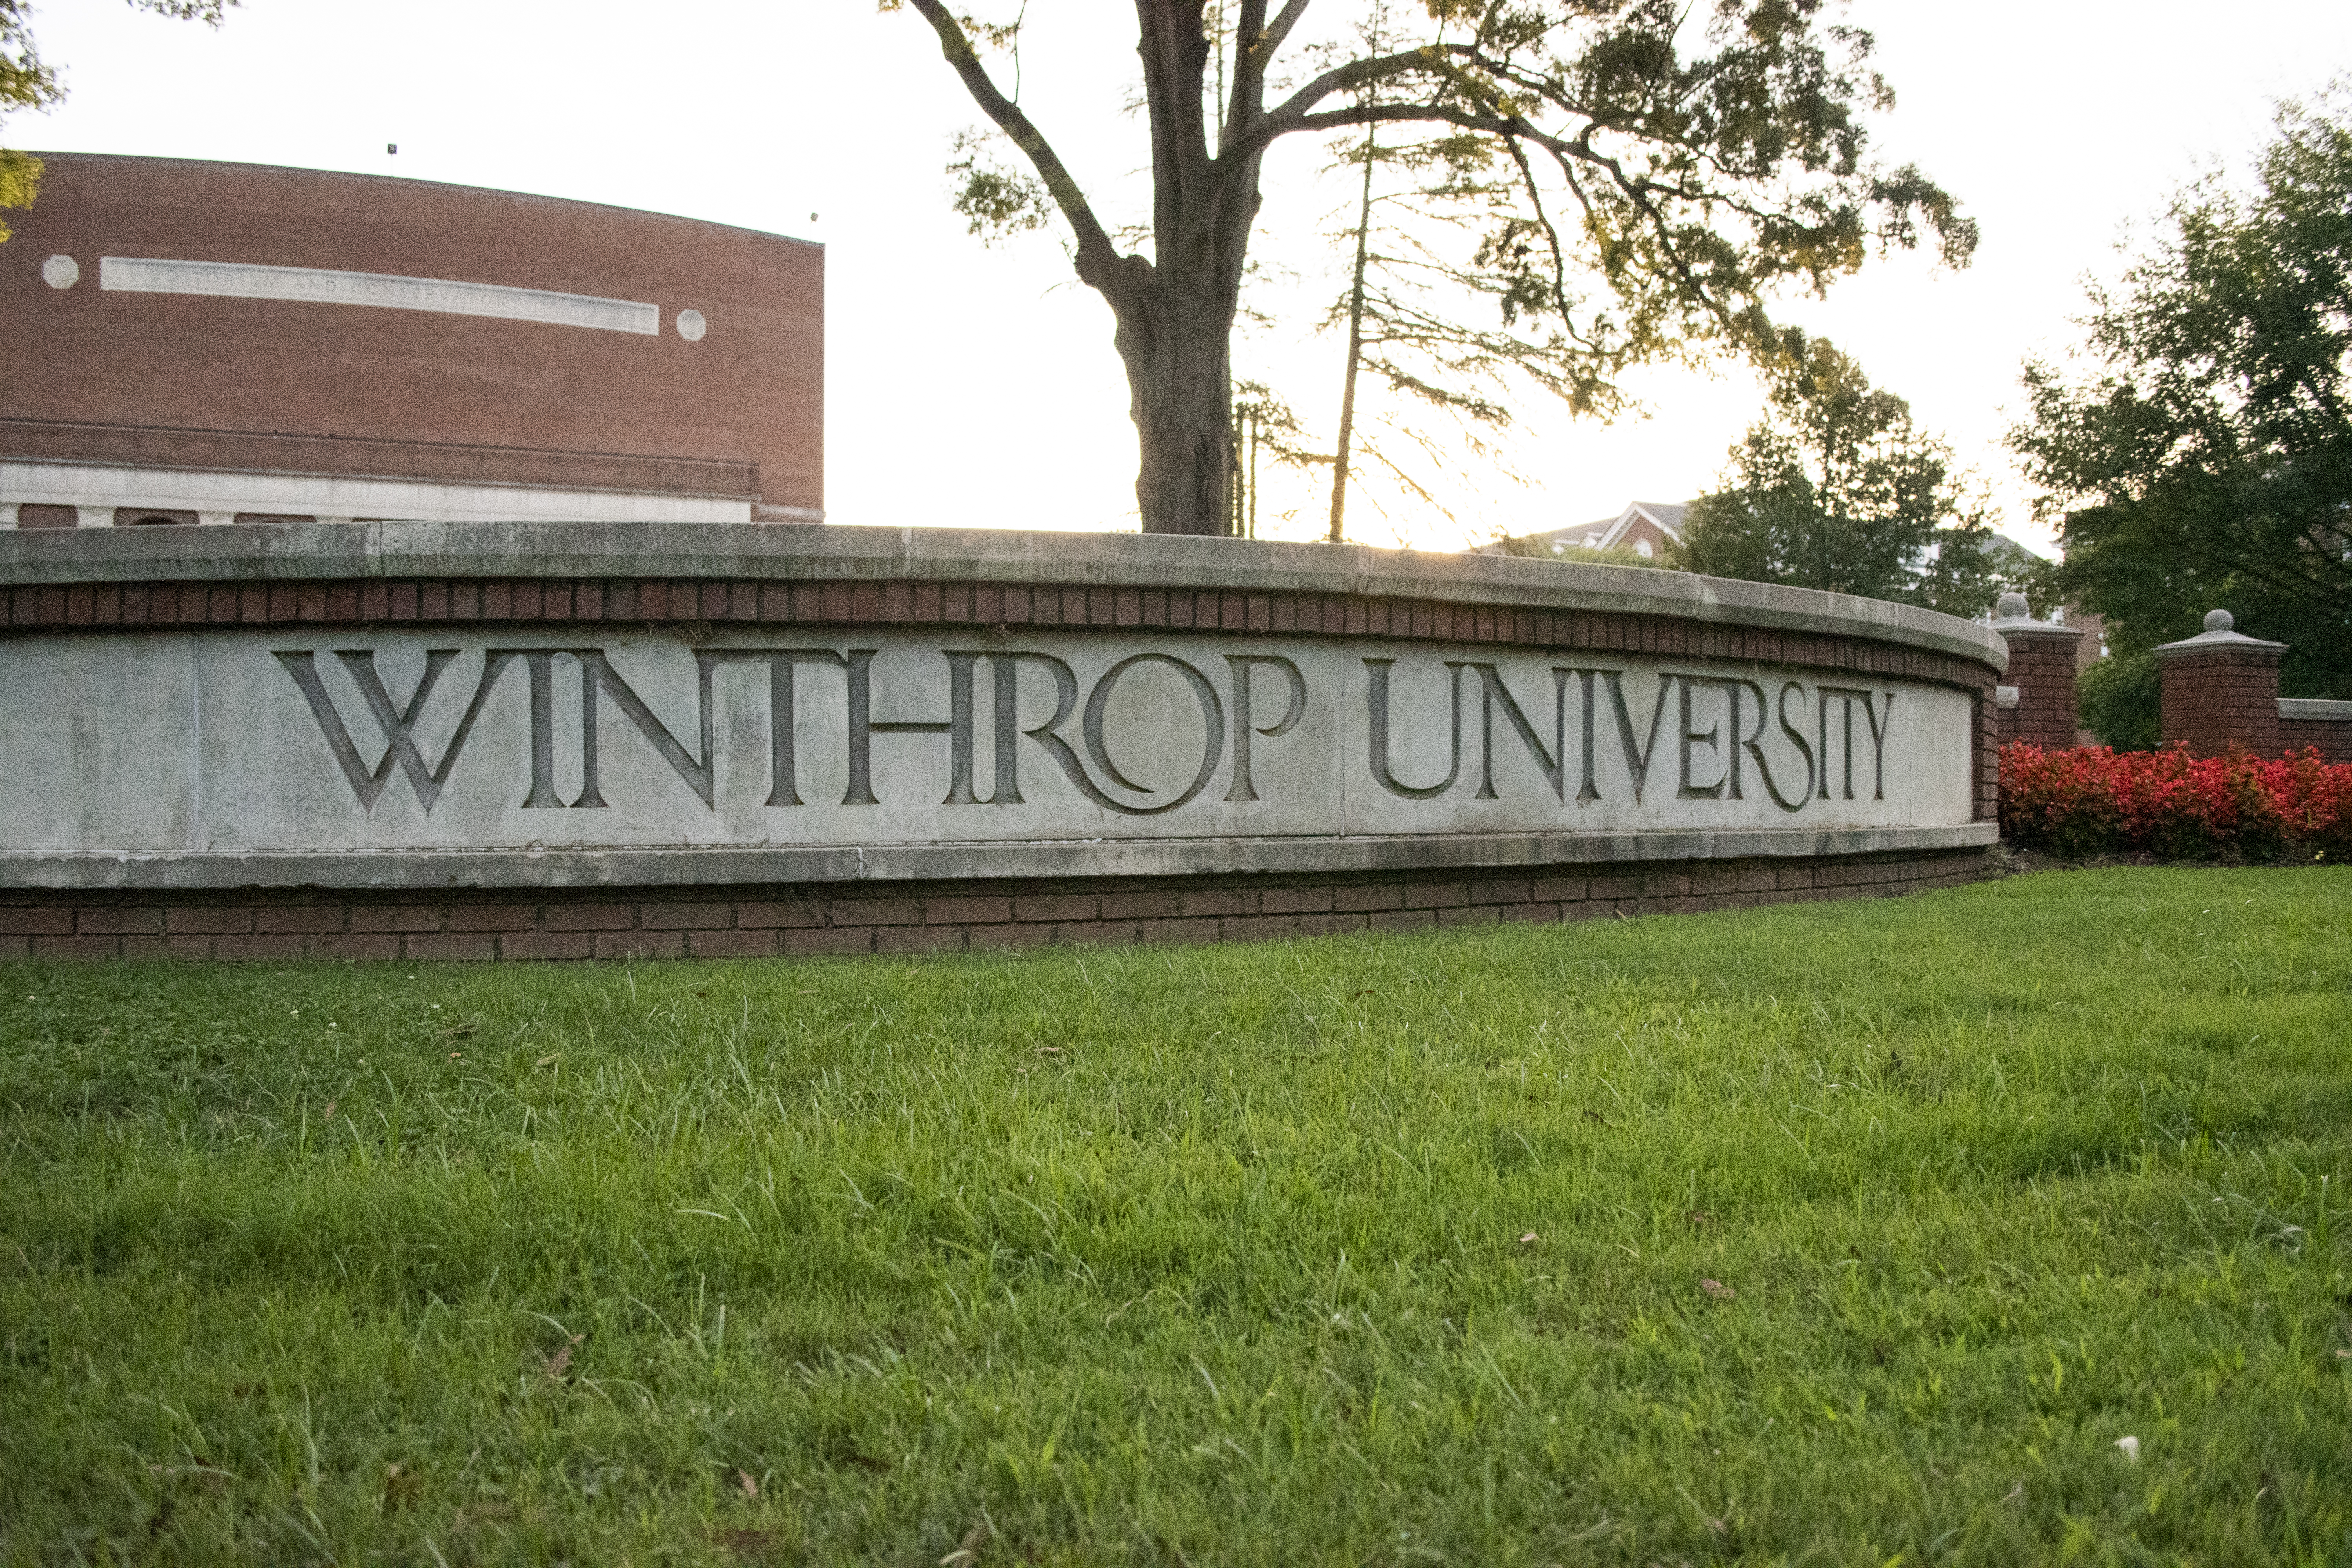 The fight against COVID-19 continues on at Winthrop